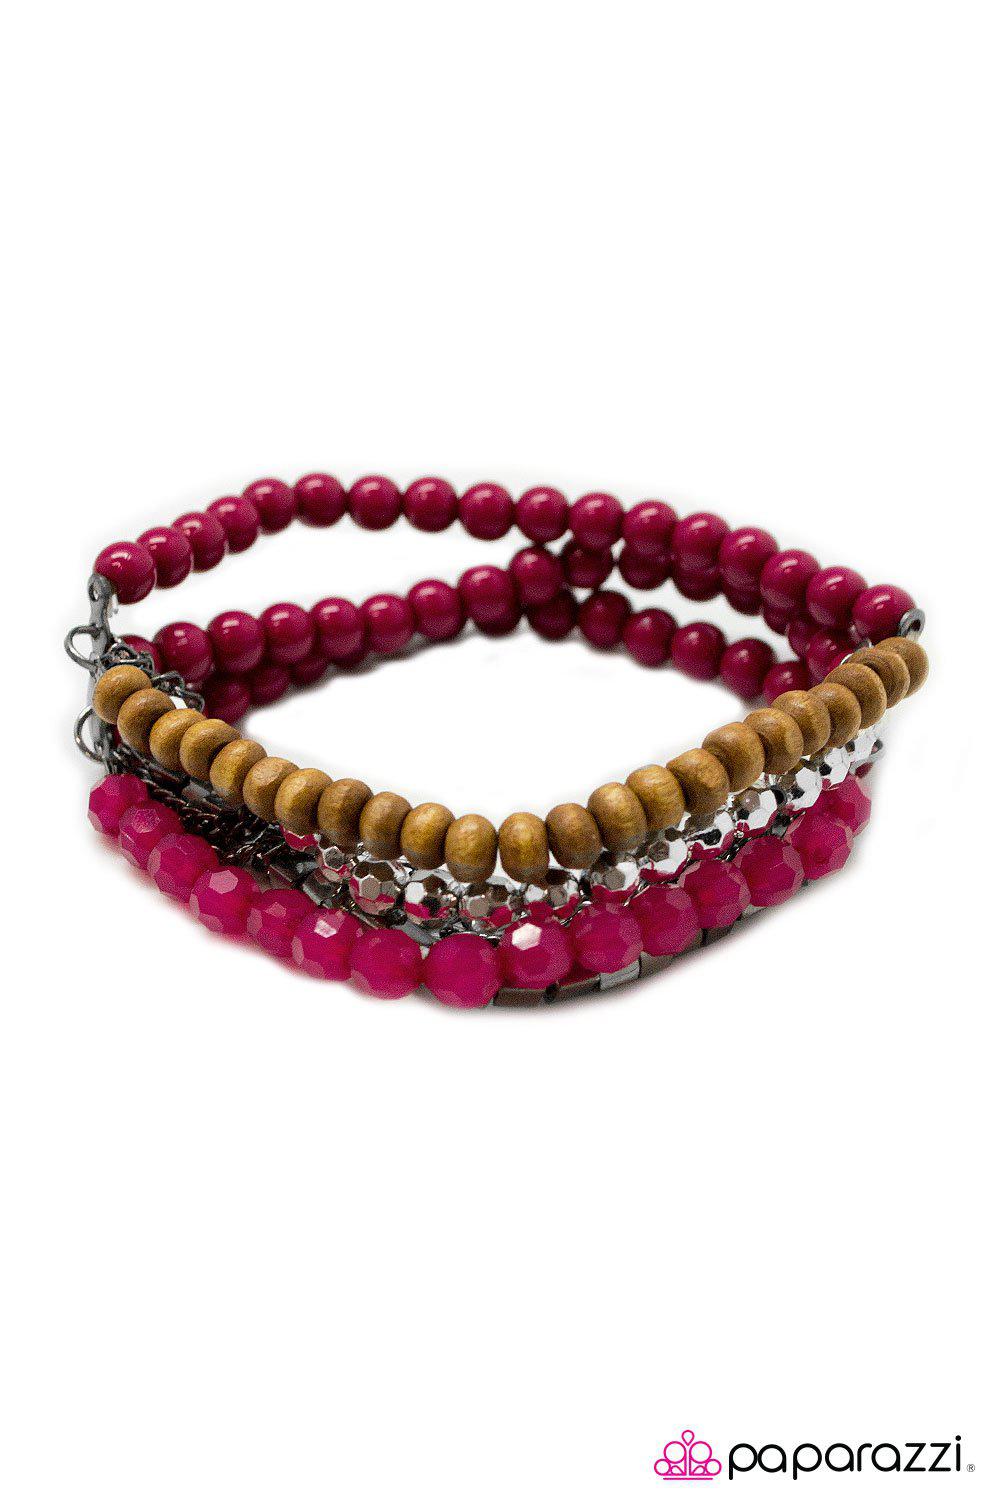 Just Bead Happy Pink and Silver Stretch Bracelet - Paparazzi Accessories-CarasShop.com - $5 Jewelry by Cara Jewels